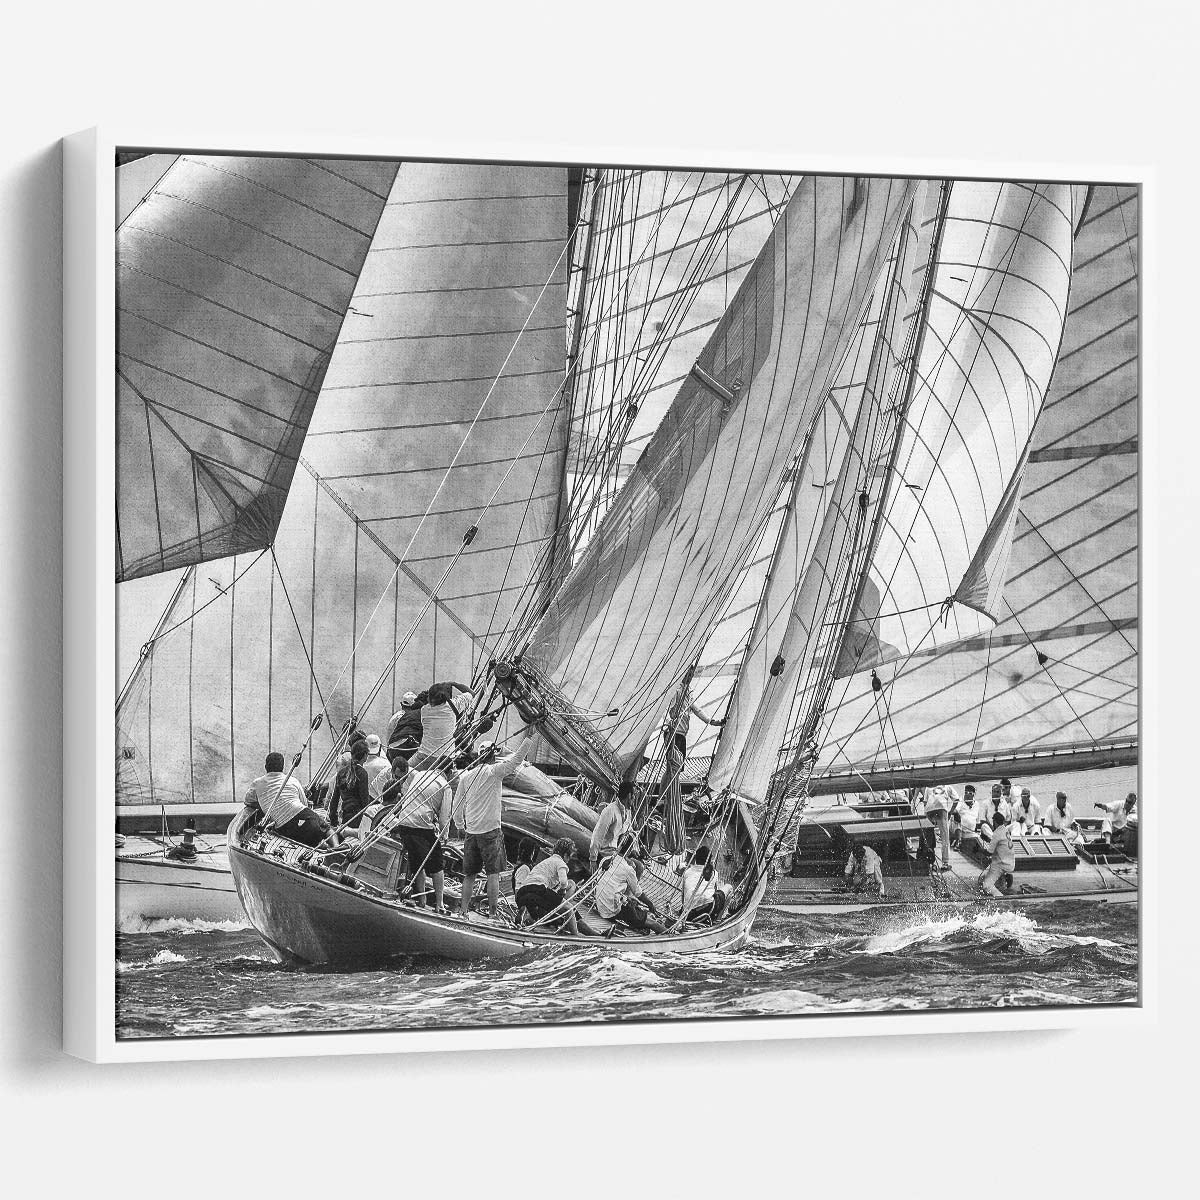 Antibes Moonbeam Yacht Race Monochrome Wall Art by Luxuriance Designs. Made in USA.